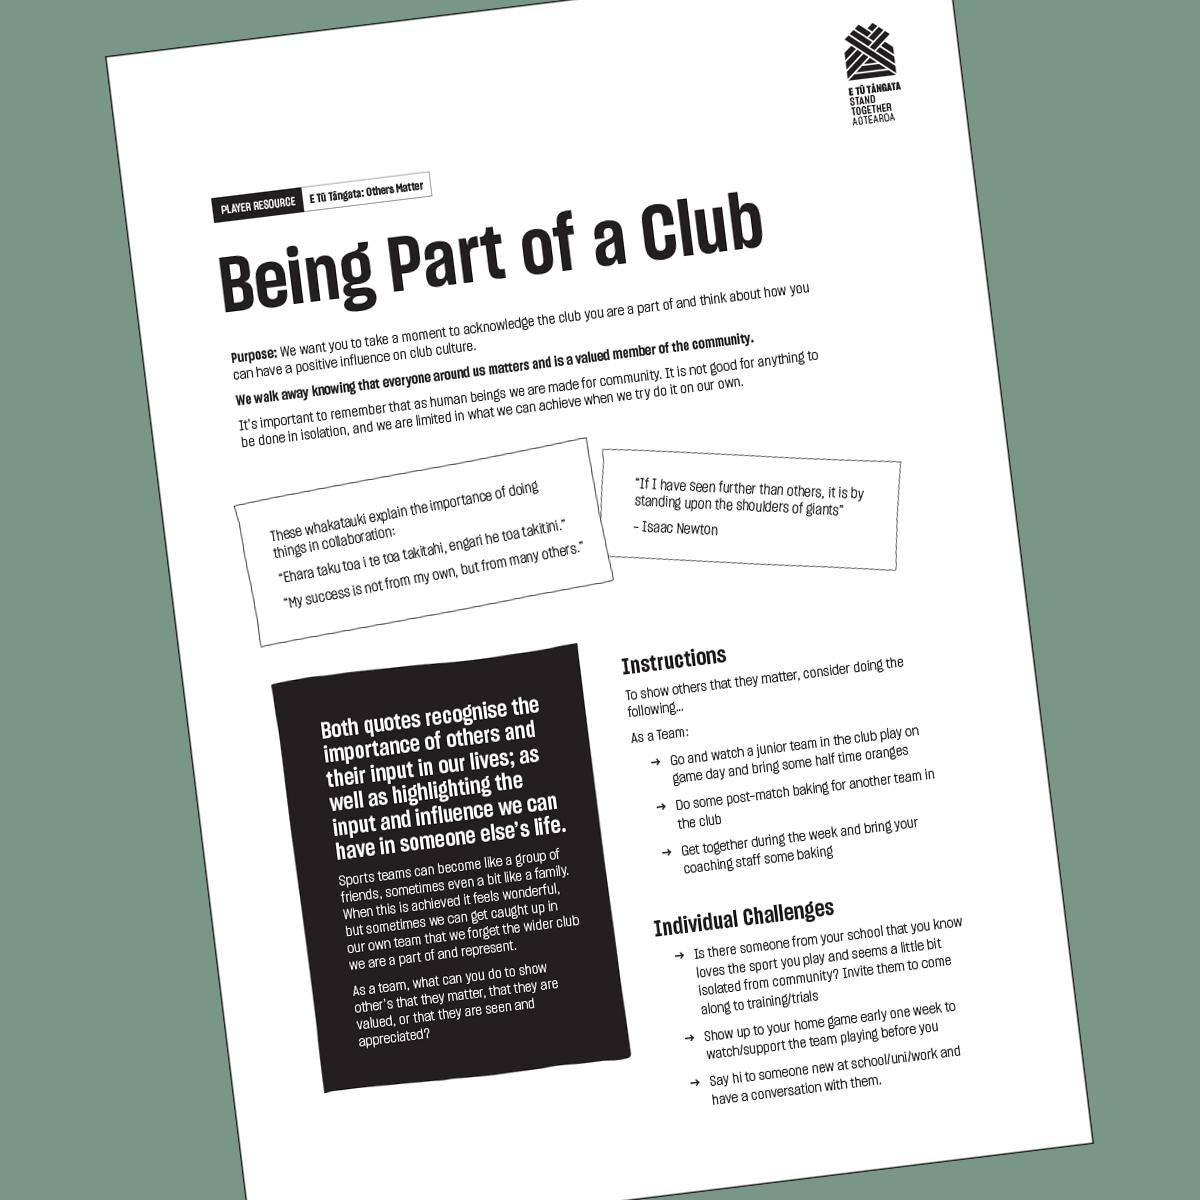 Being Part of a Club